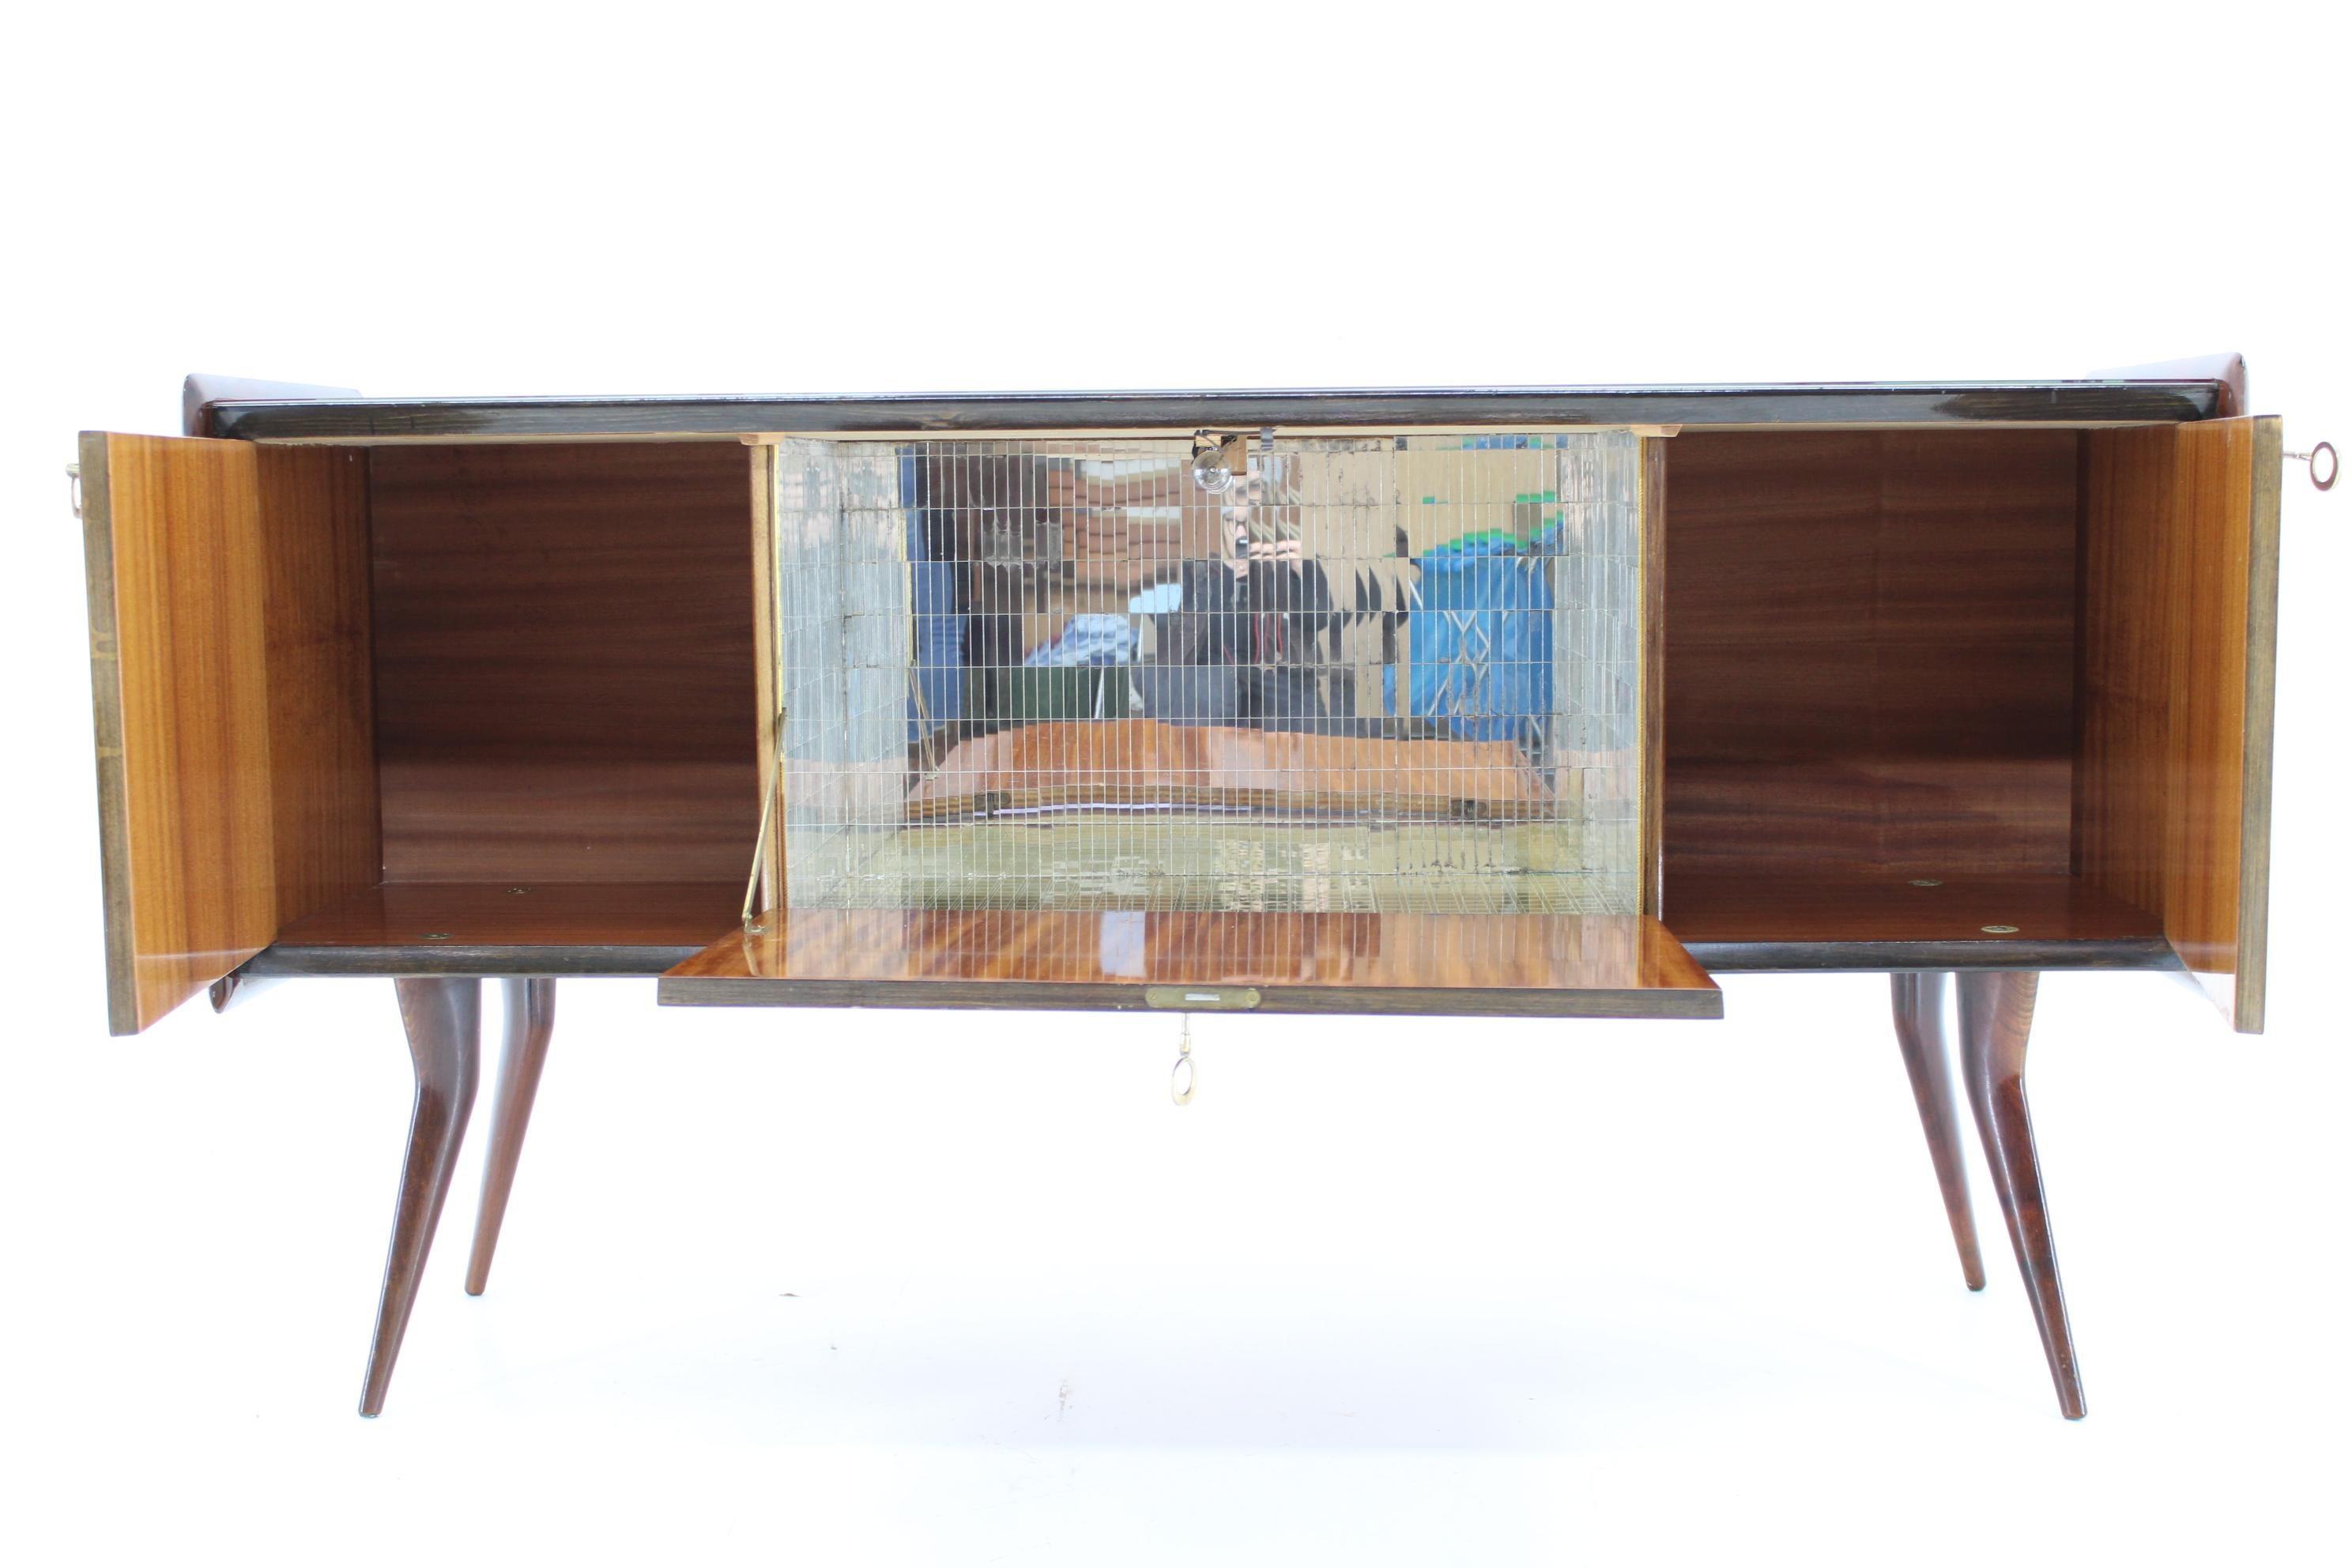 Mid-20th Century 1950s Italian Sideboard with Walnut Veneer in High Gloss Finish For Sale